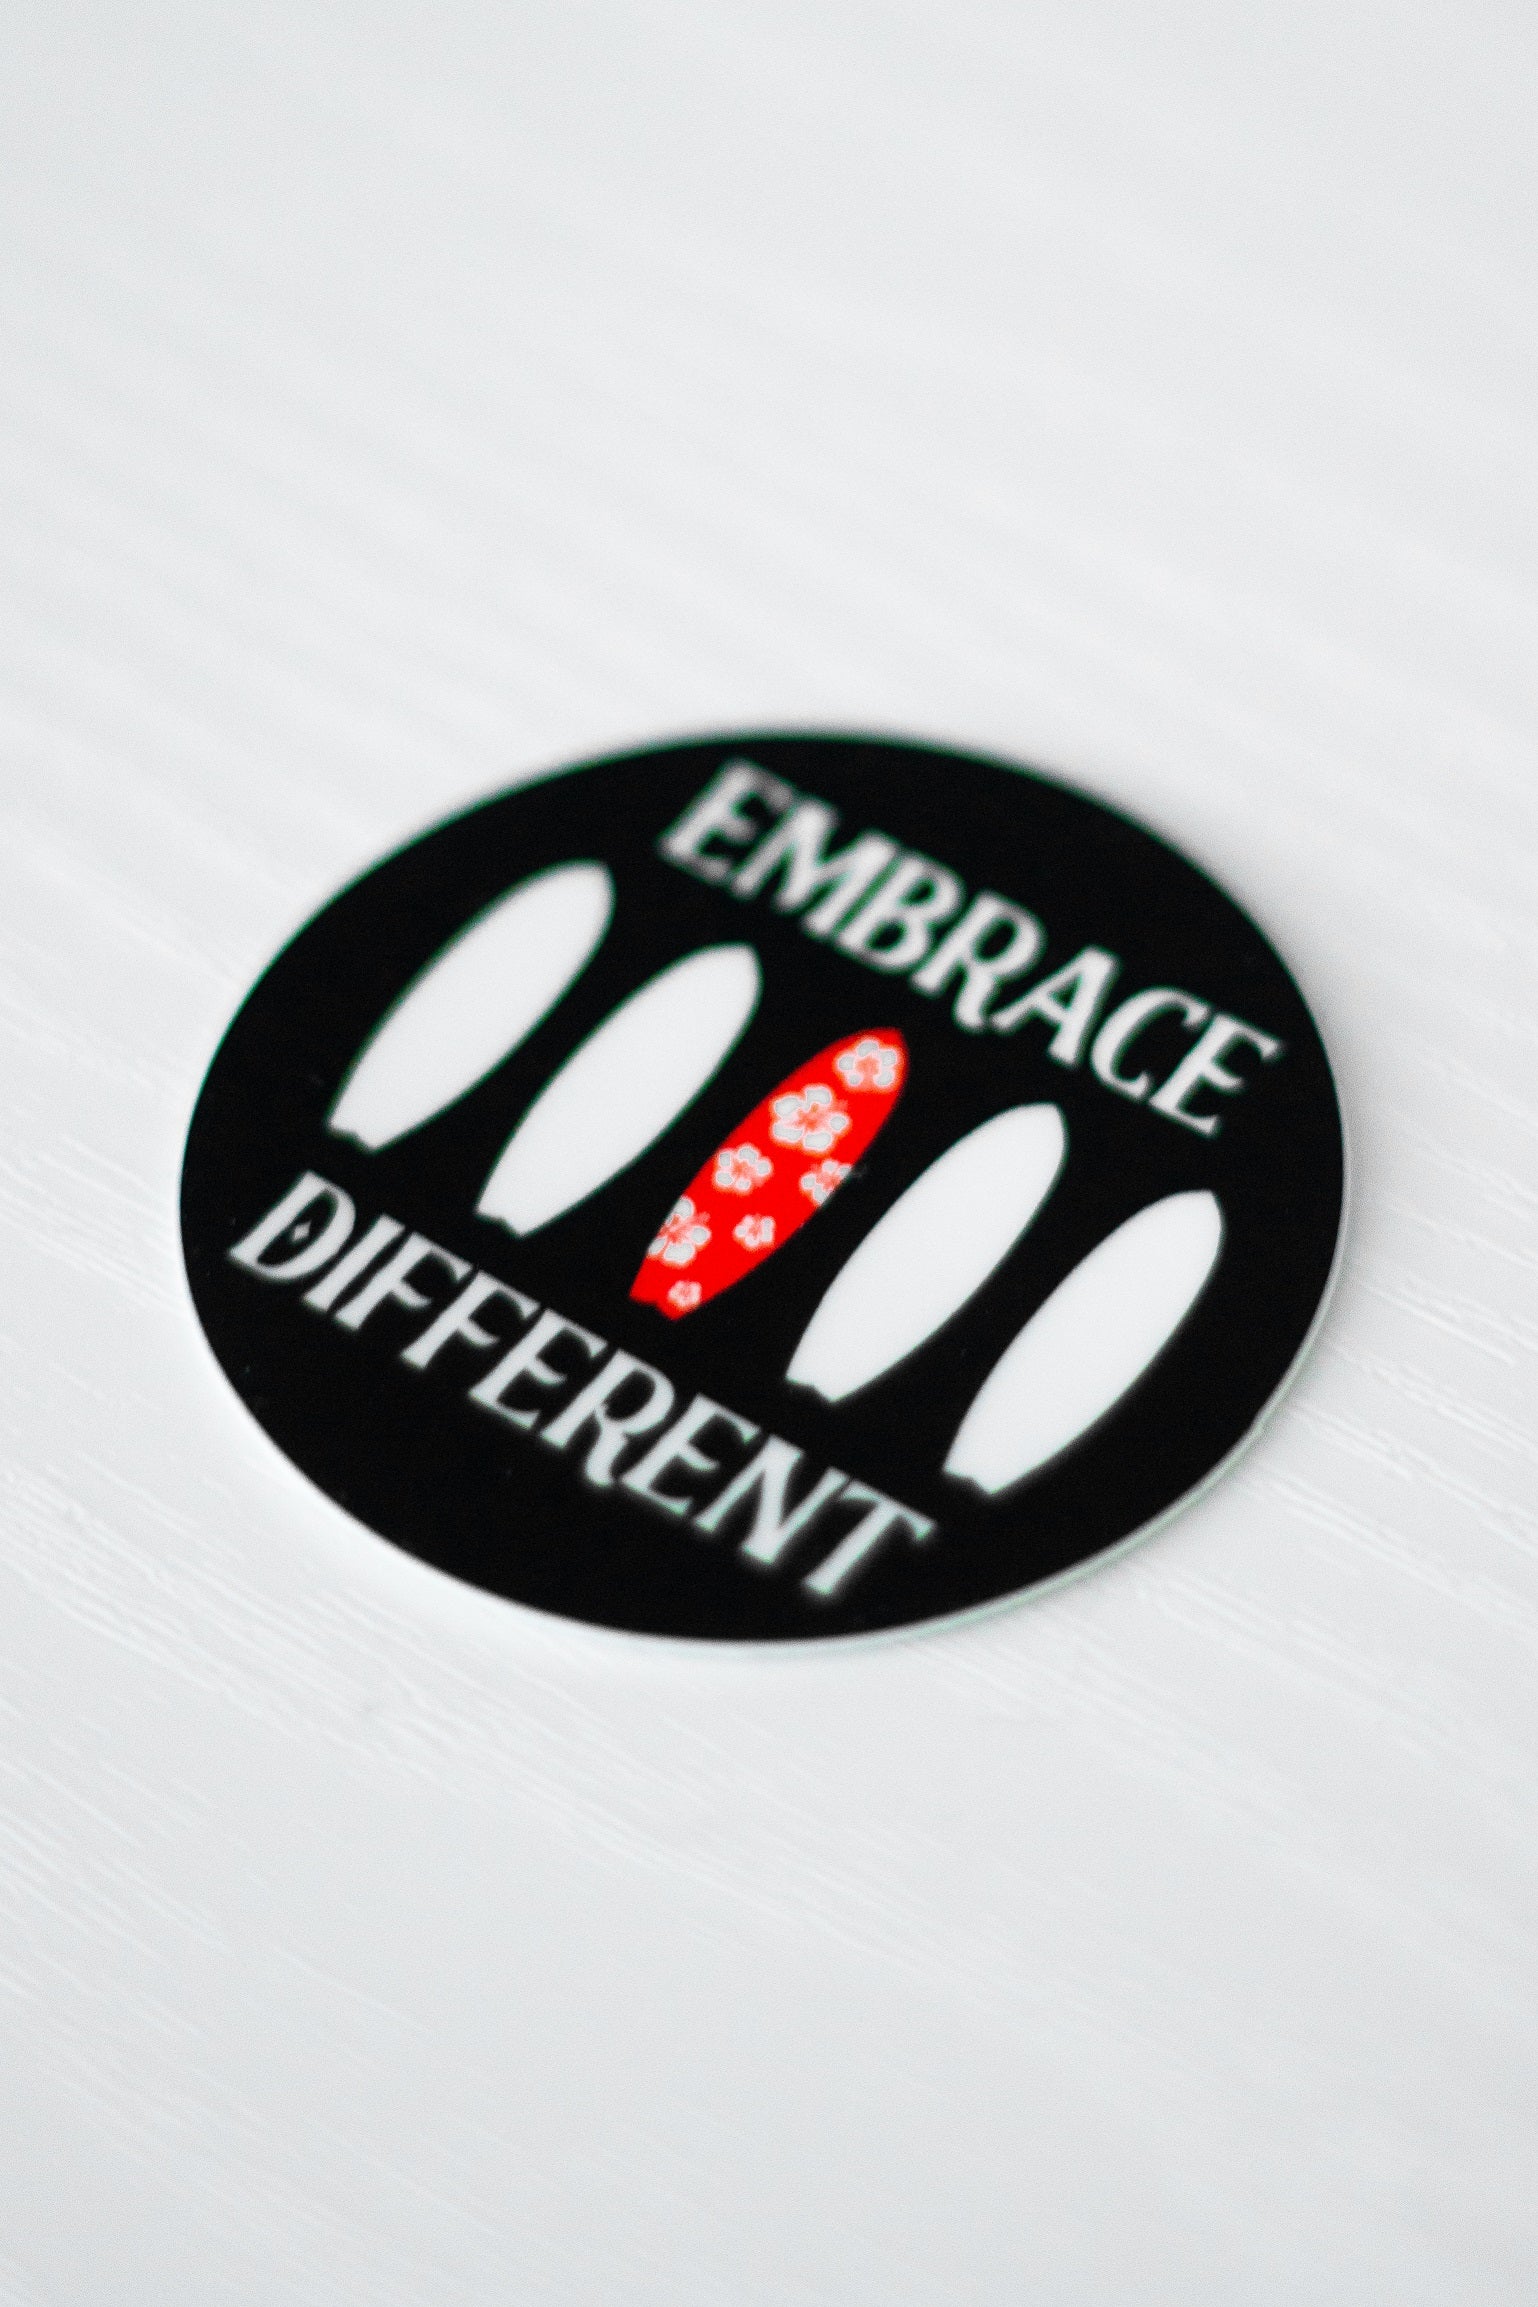 The Embrace Different Sticker